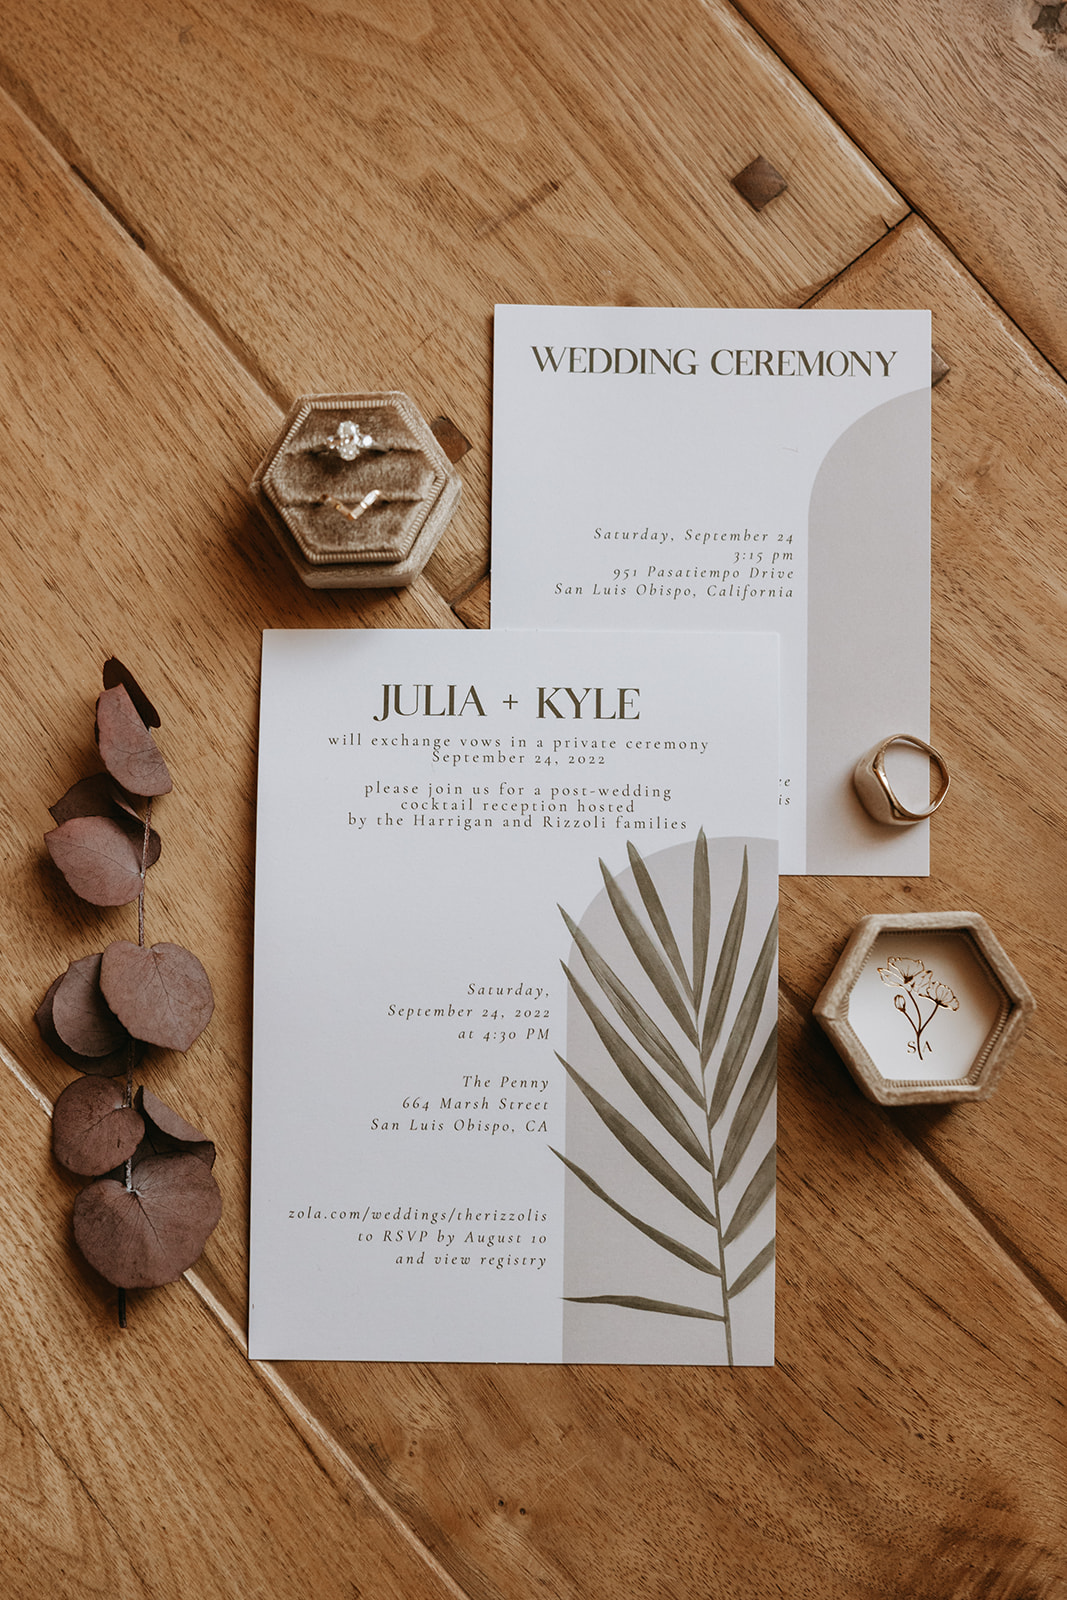 wedding day details with the invitation and the rings | The Penny: A Downtown Wedding Venue in San Luis Obispo